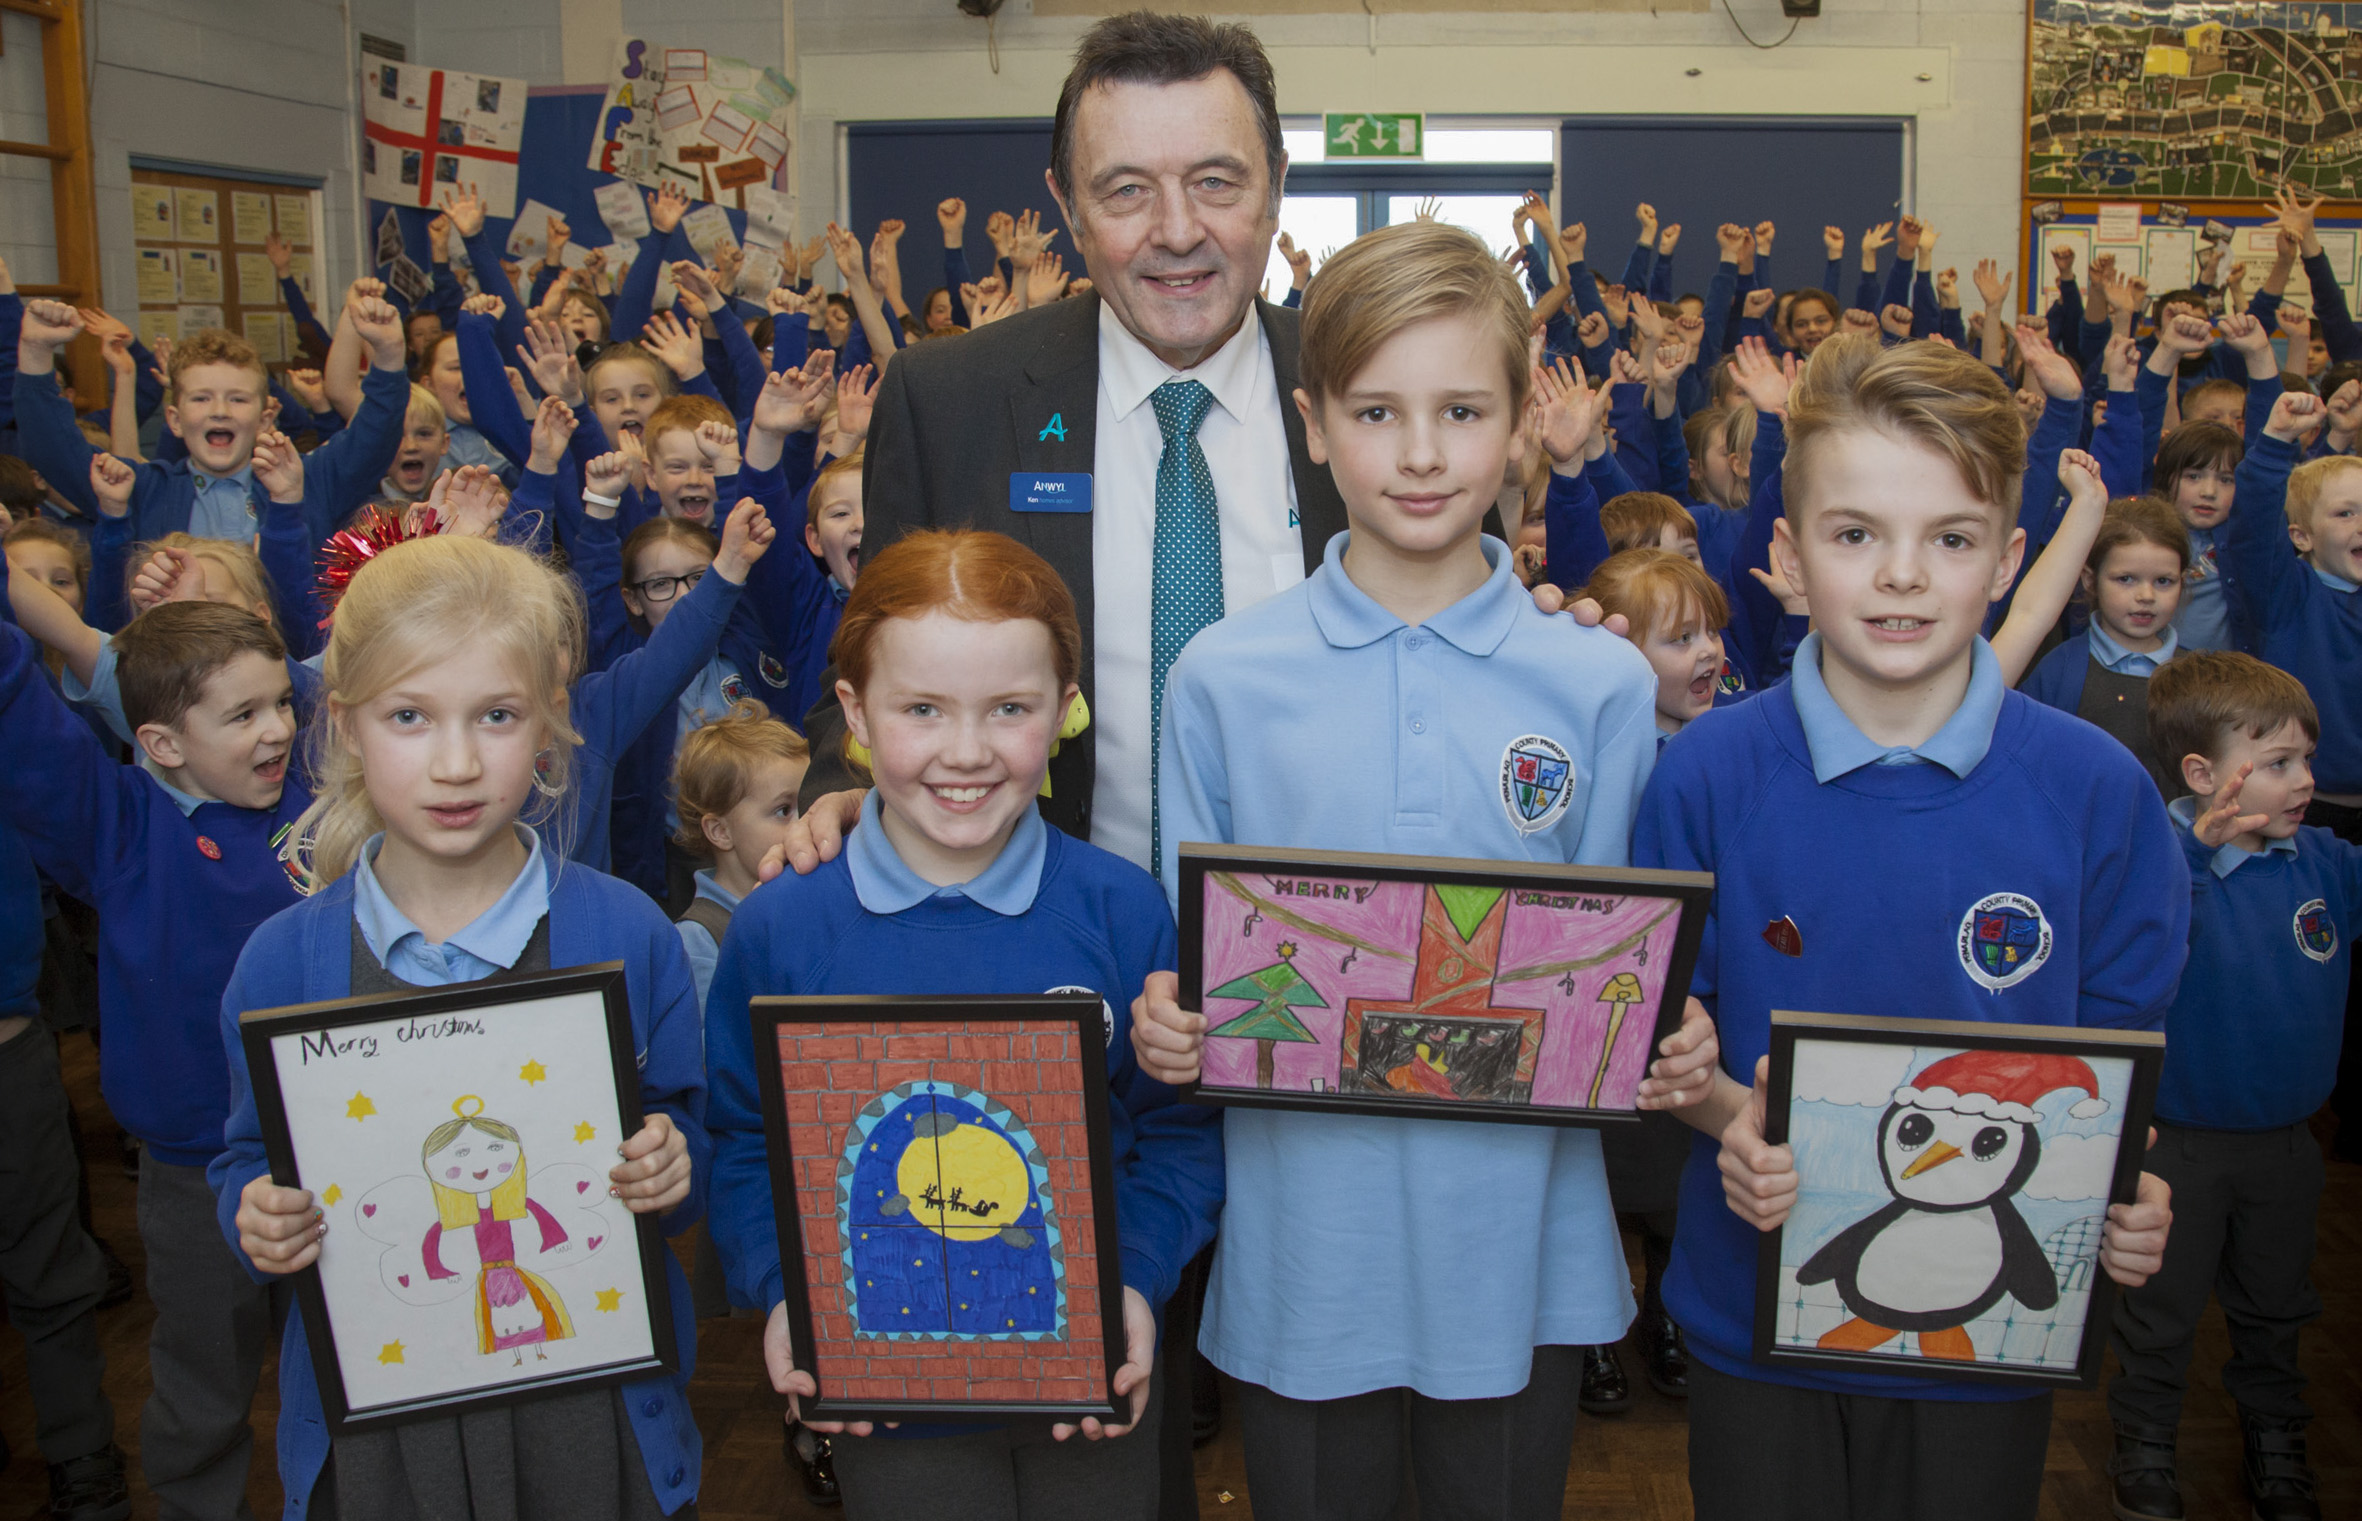 School children from Penarlag Primary win Anwyl’s Christmas card competition